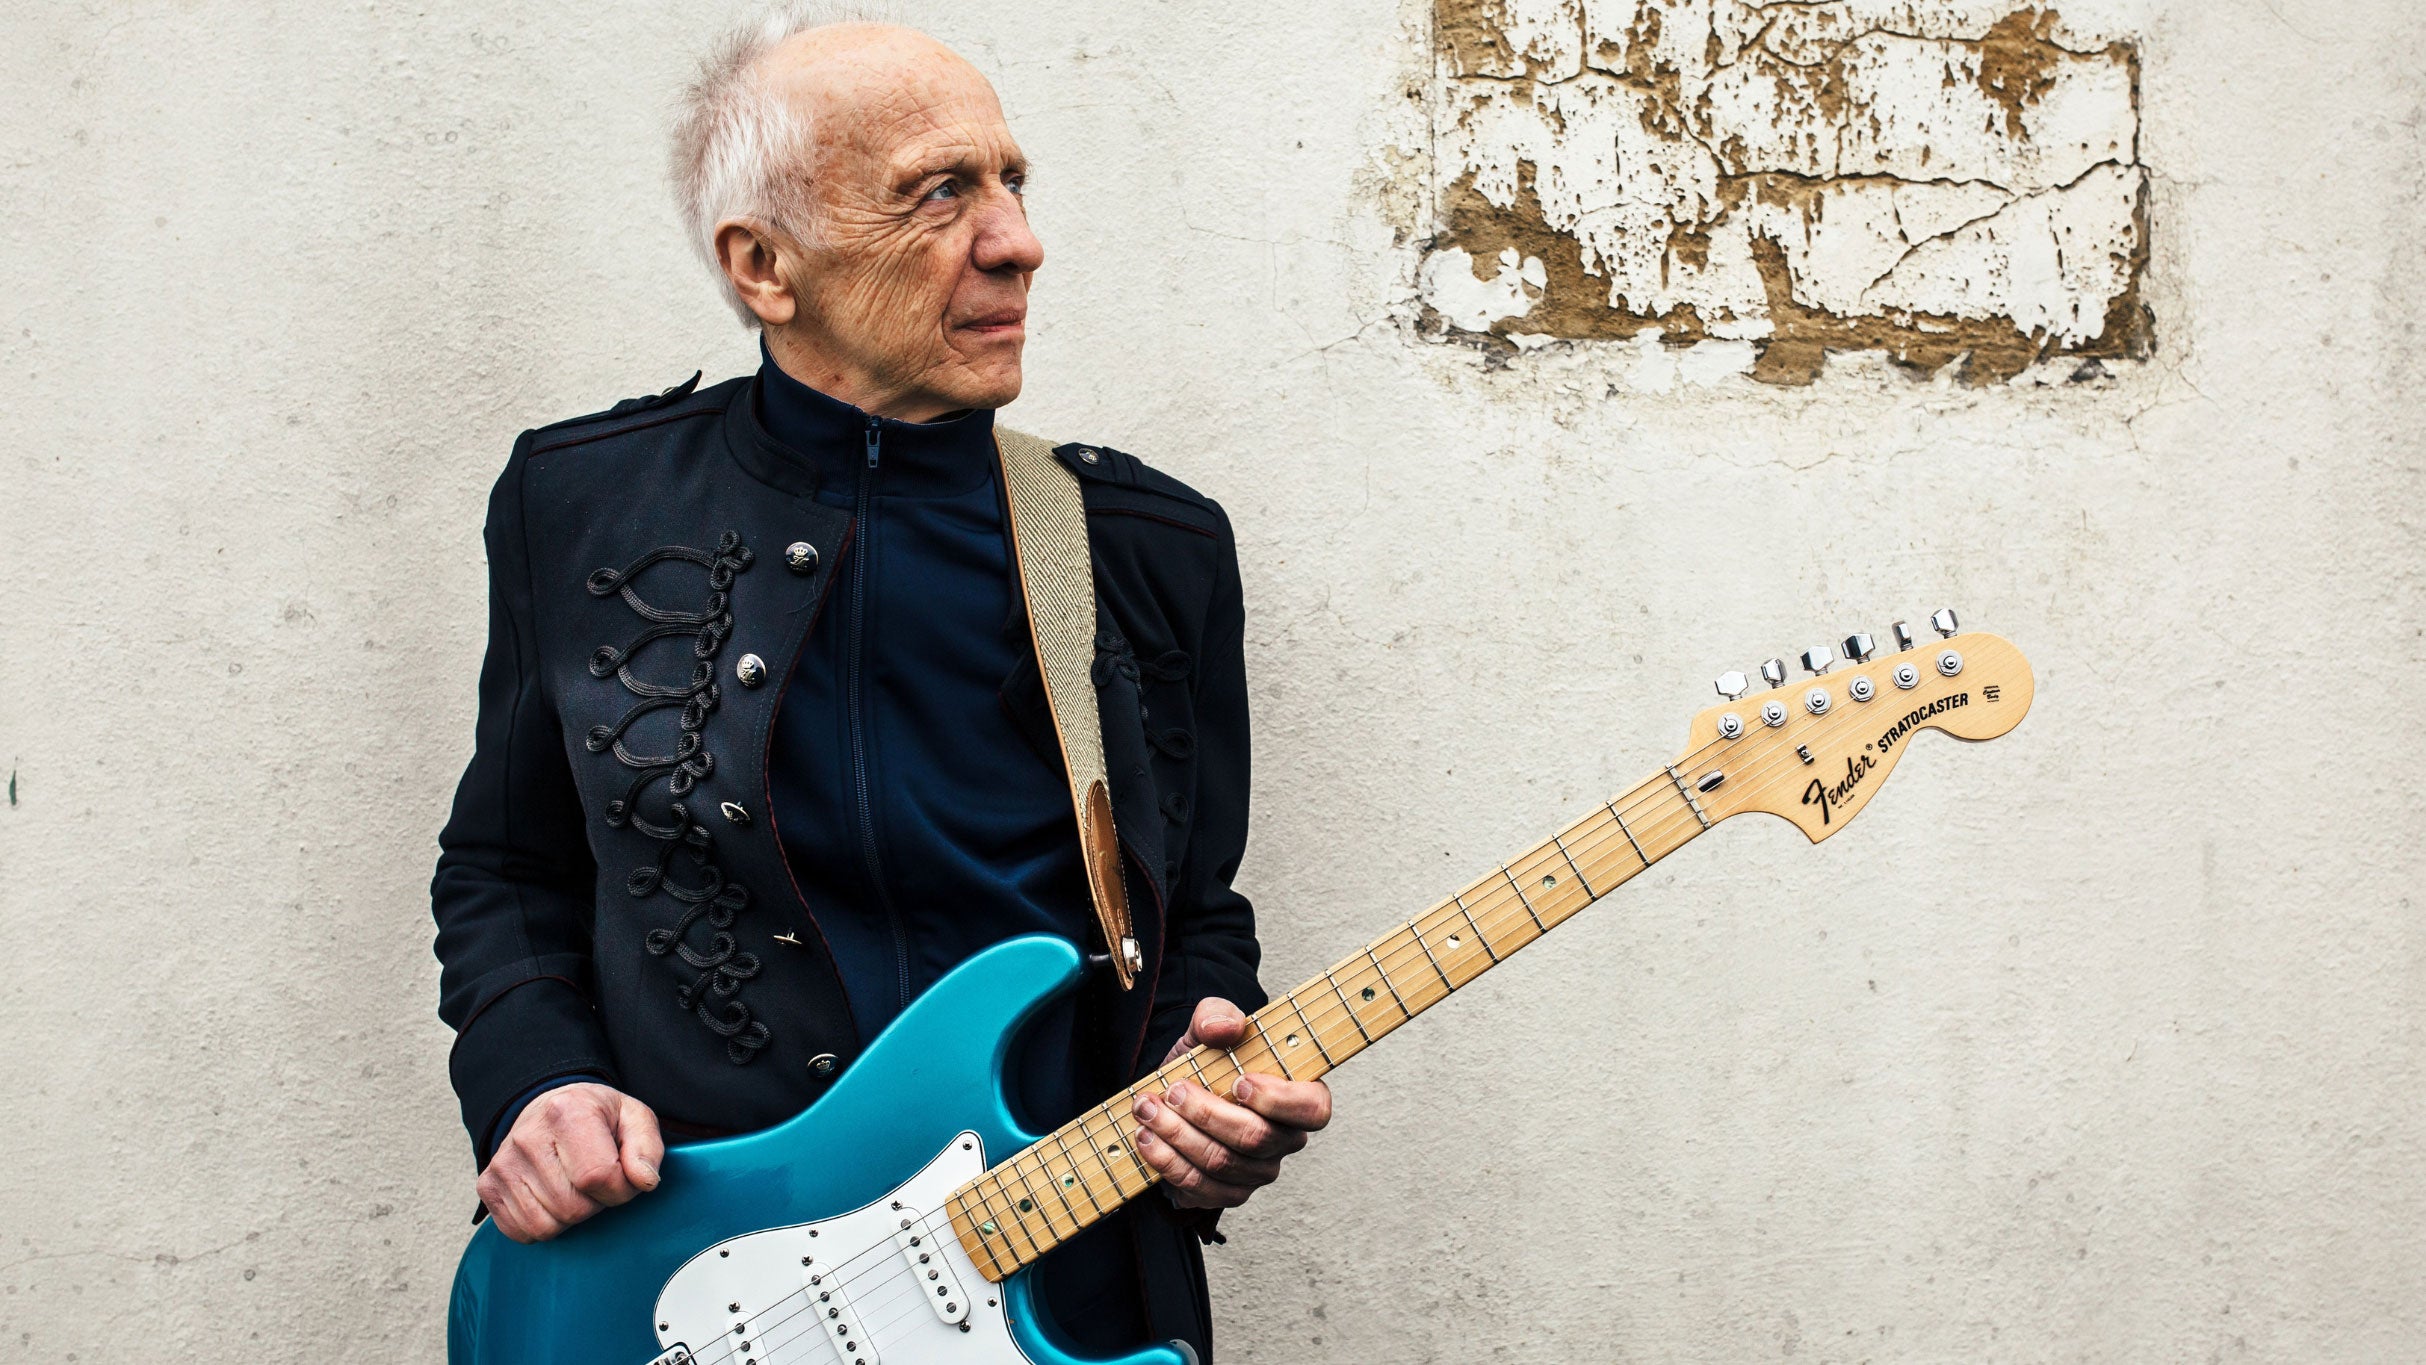 Robin Trower pre-sale code for event tickets in Montclair, NJ (The Wellmont Theater)